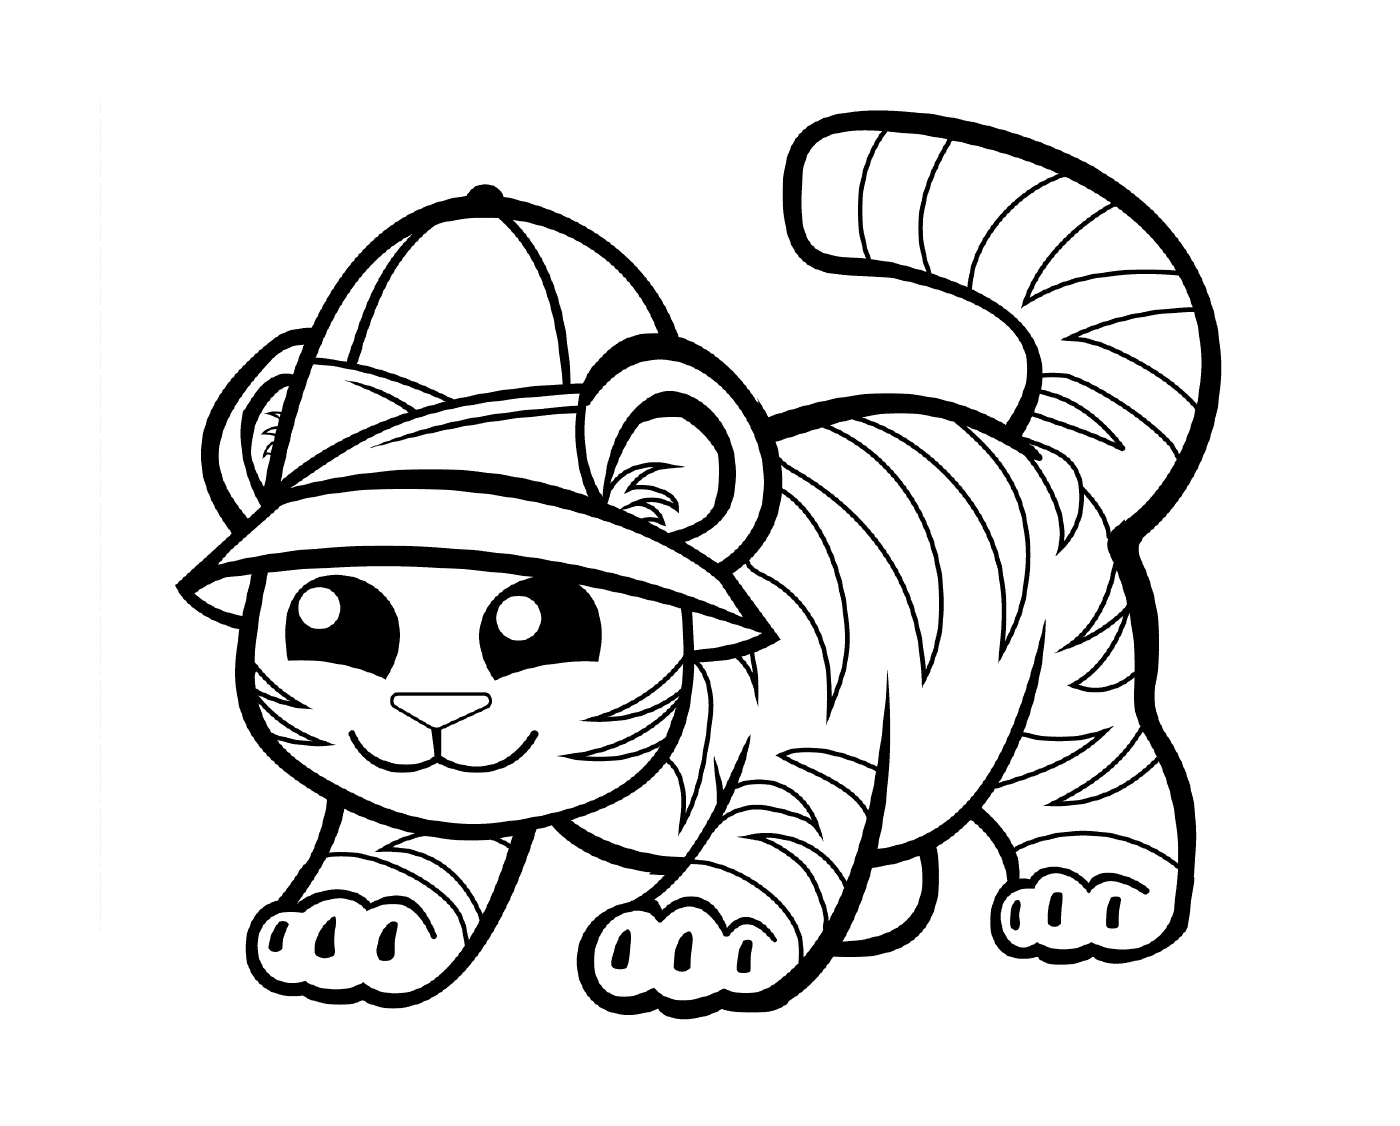  A tiger in a hat 